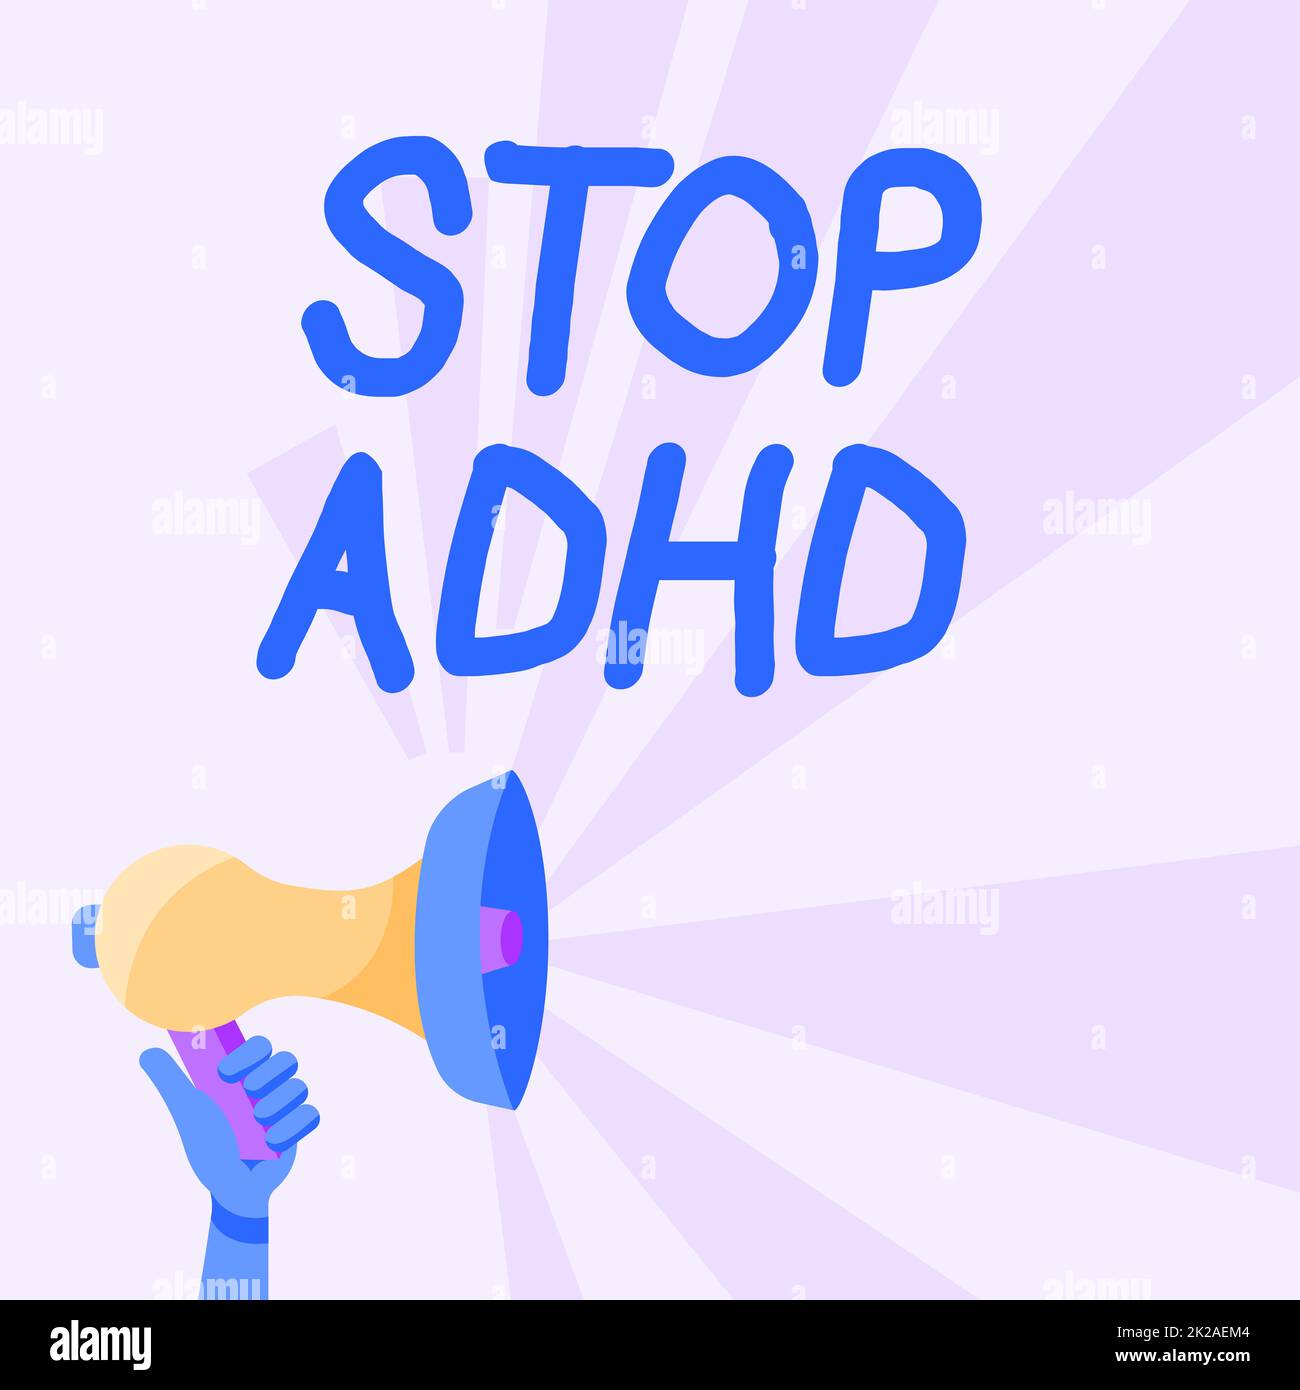 Conceptual display Stop Adhd. Internet Concept treat a disorder that affects the brain and behaviors of a child Illustration Of Hand Holding Megaphone With Sun Ray Making Announcement. Stock Photo